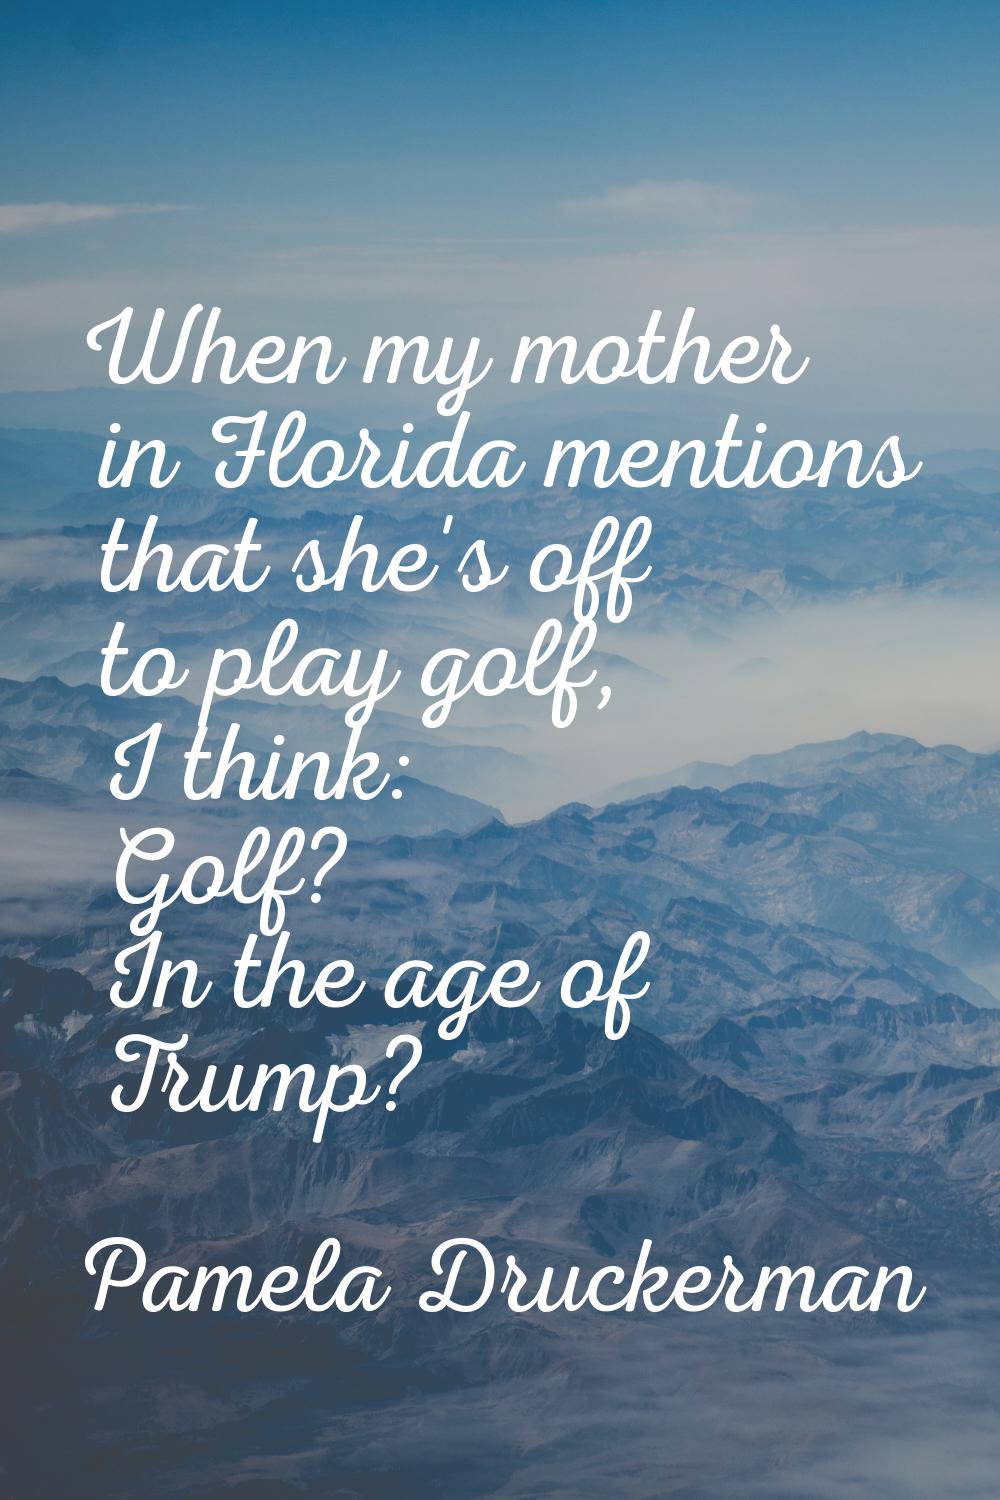 When my mother in Florida mentions that she's off to play golf, I think: Golf? In the age of Trump?